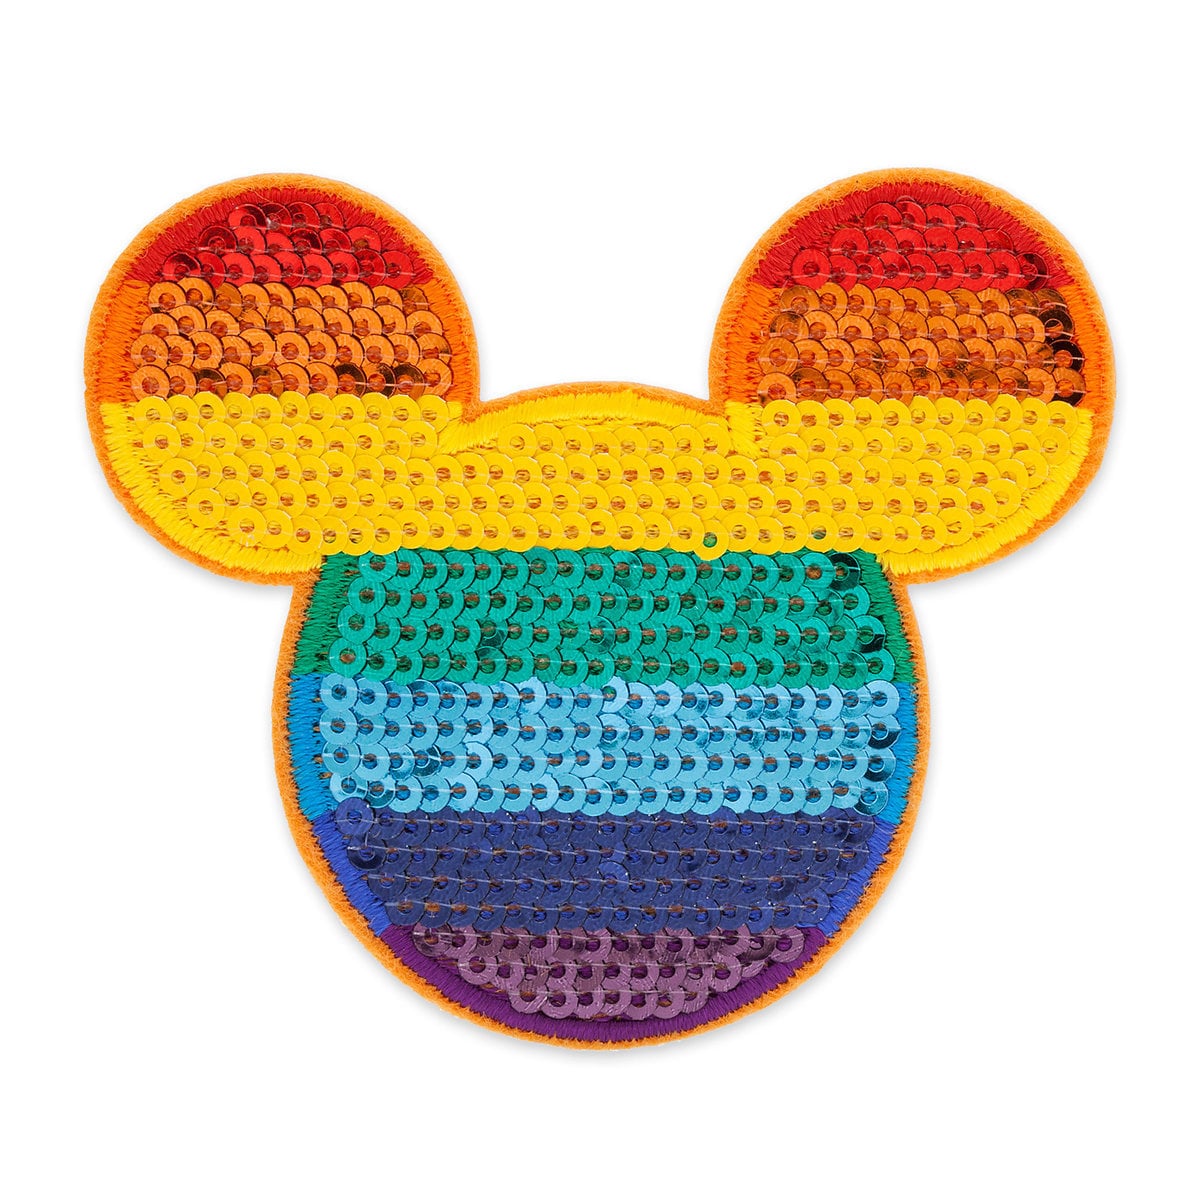 Disney Parks Mickey Mouse Icon Rainbow Patched New